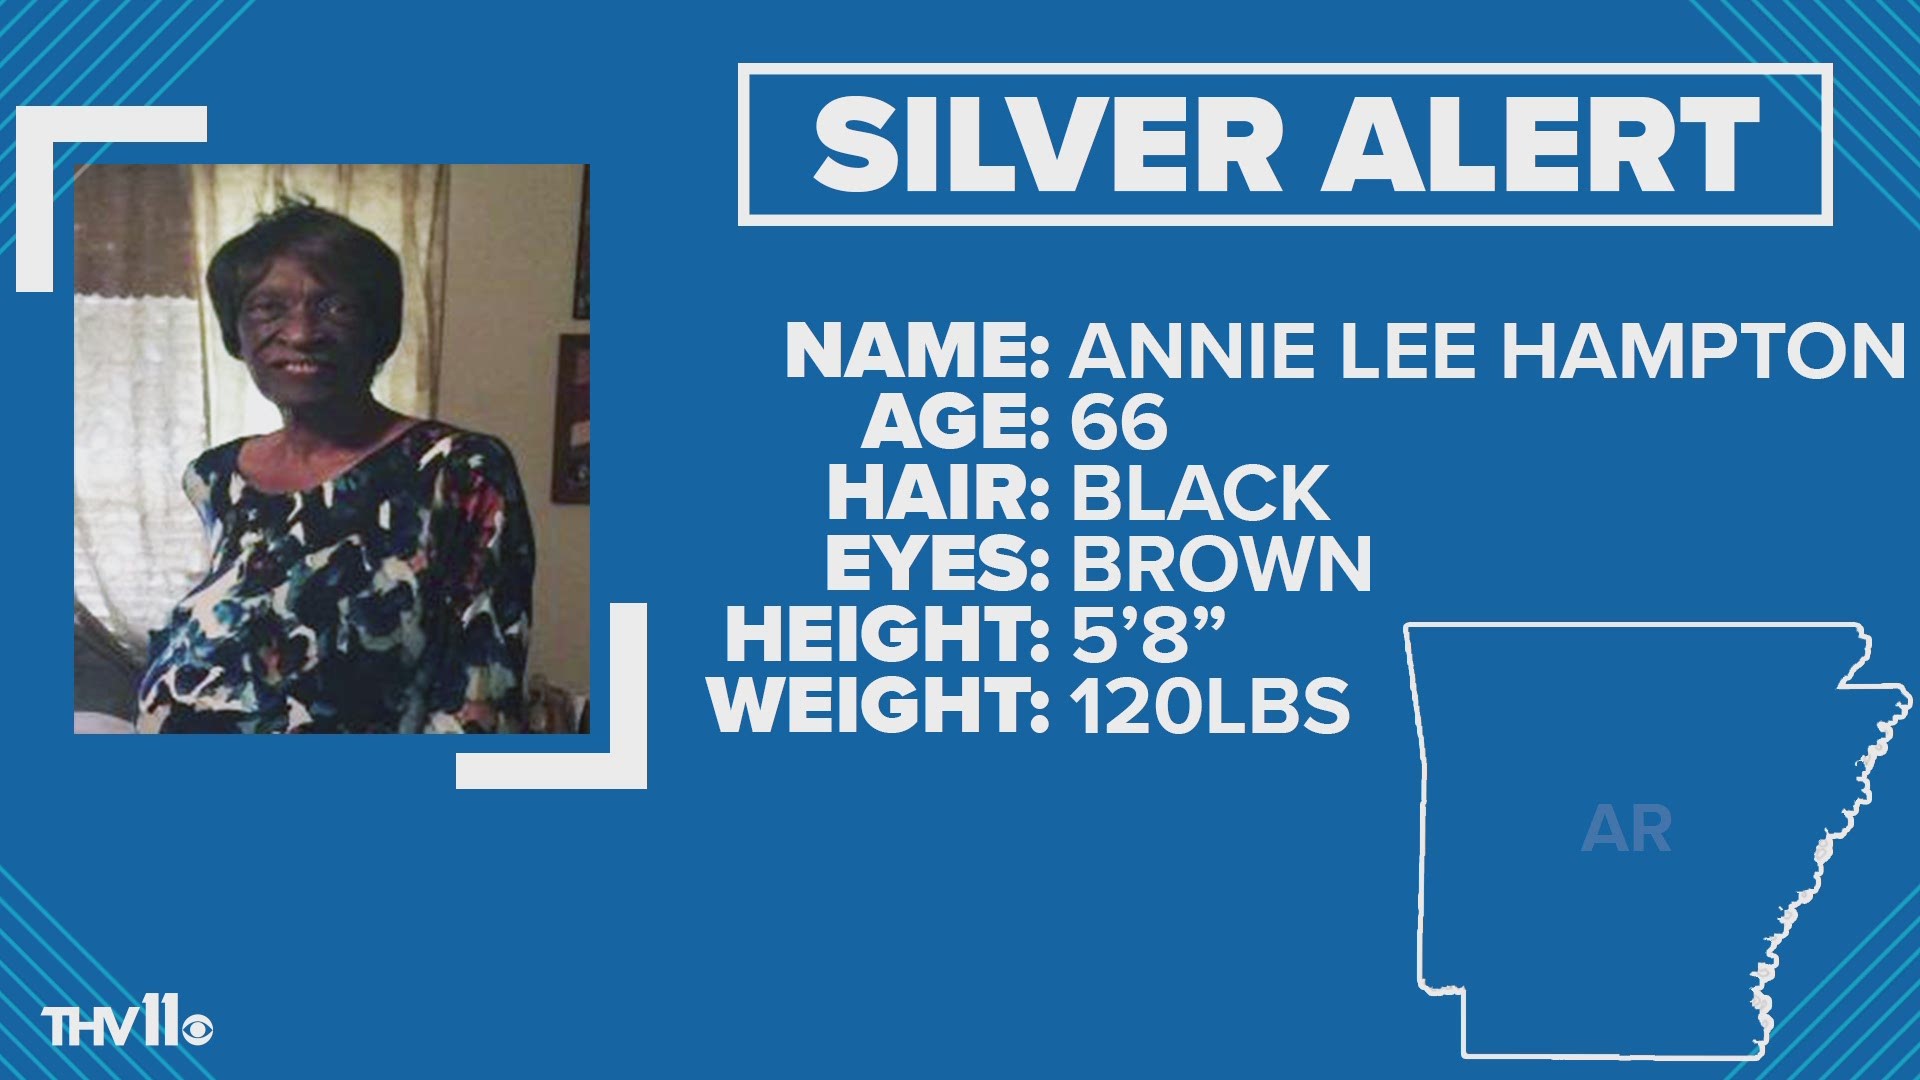 The Arkansas State Police have activated a Silver Alert for 66-year-old Annie Lee Hampton from Marianne.